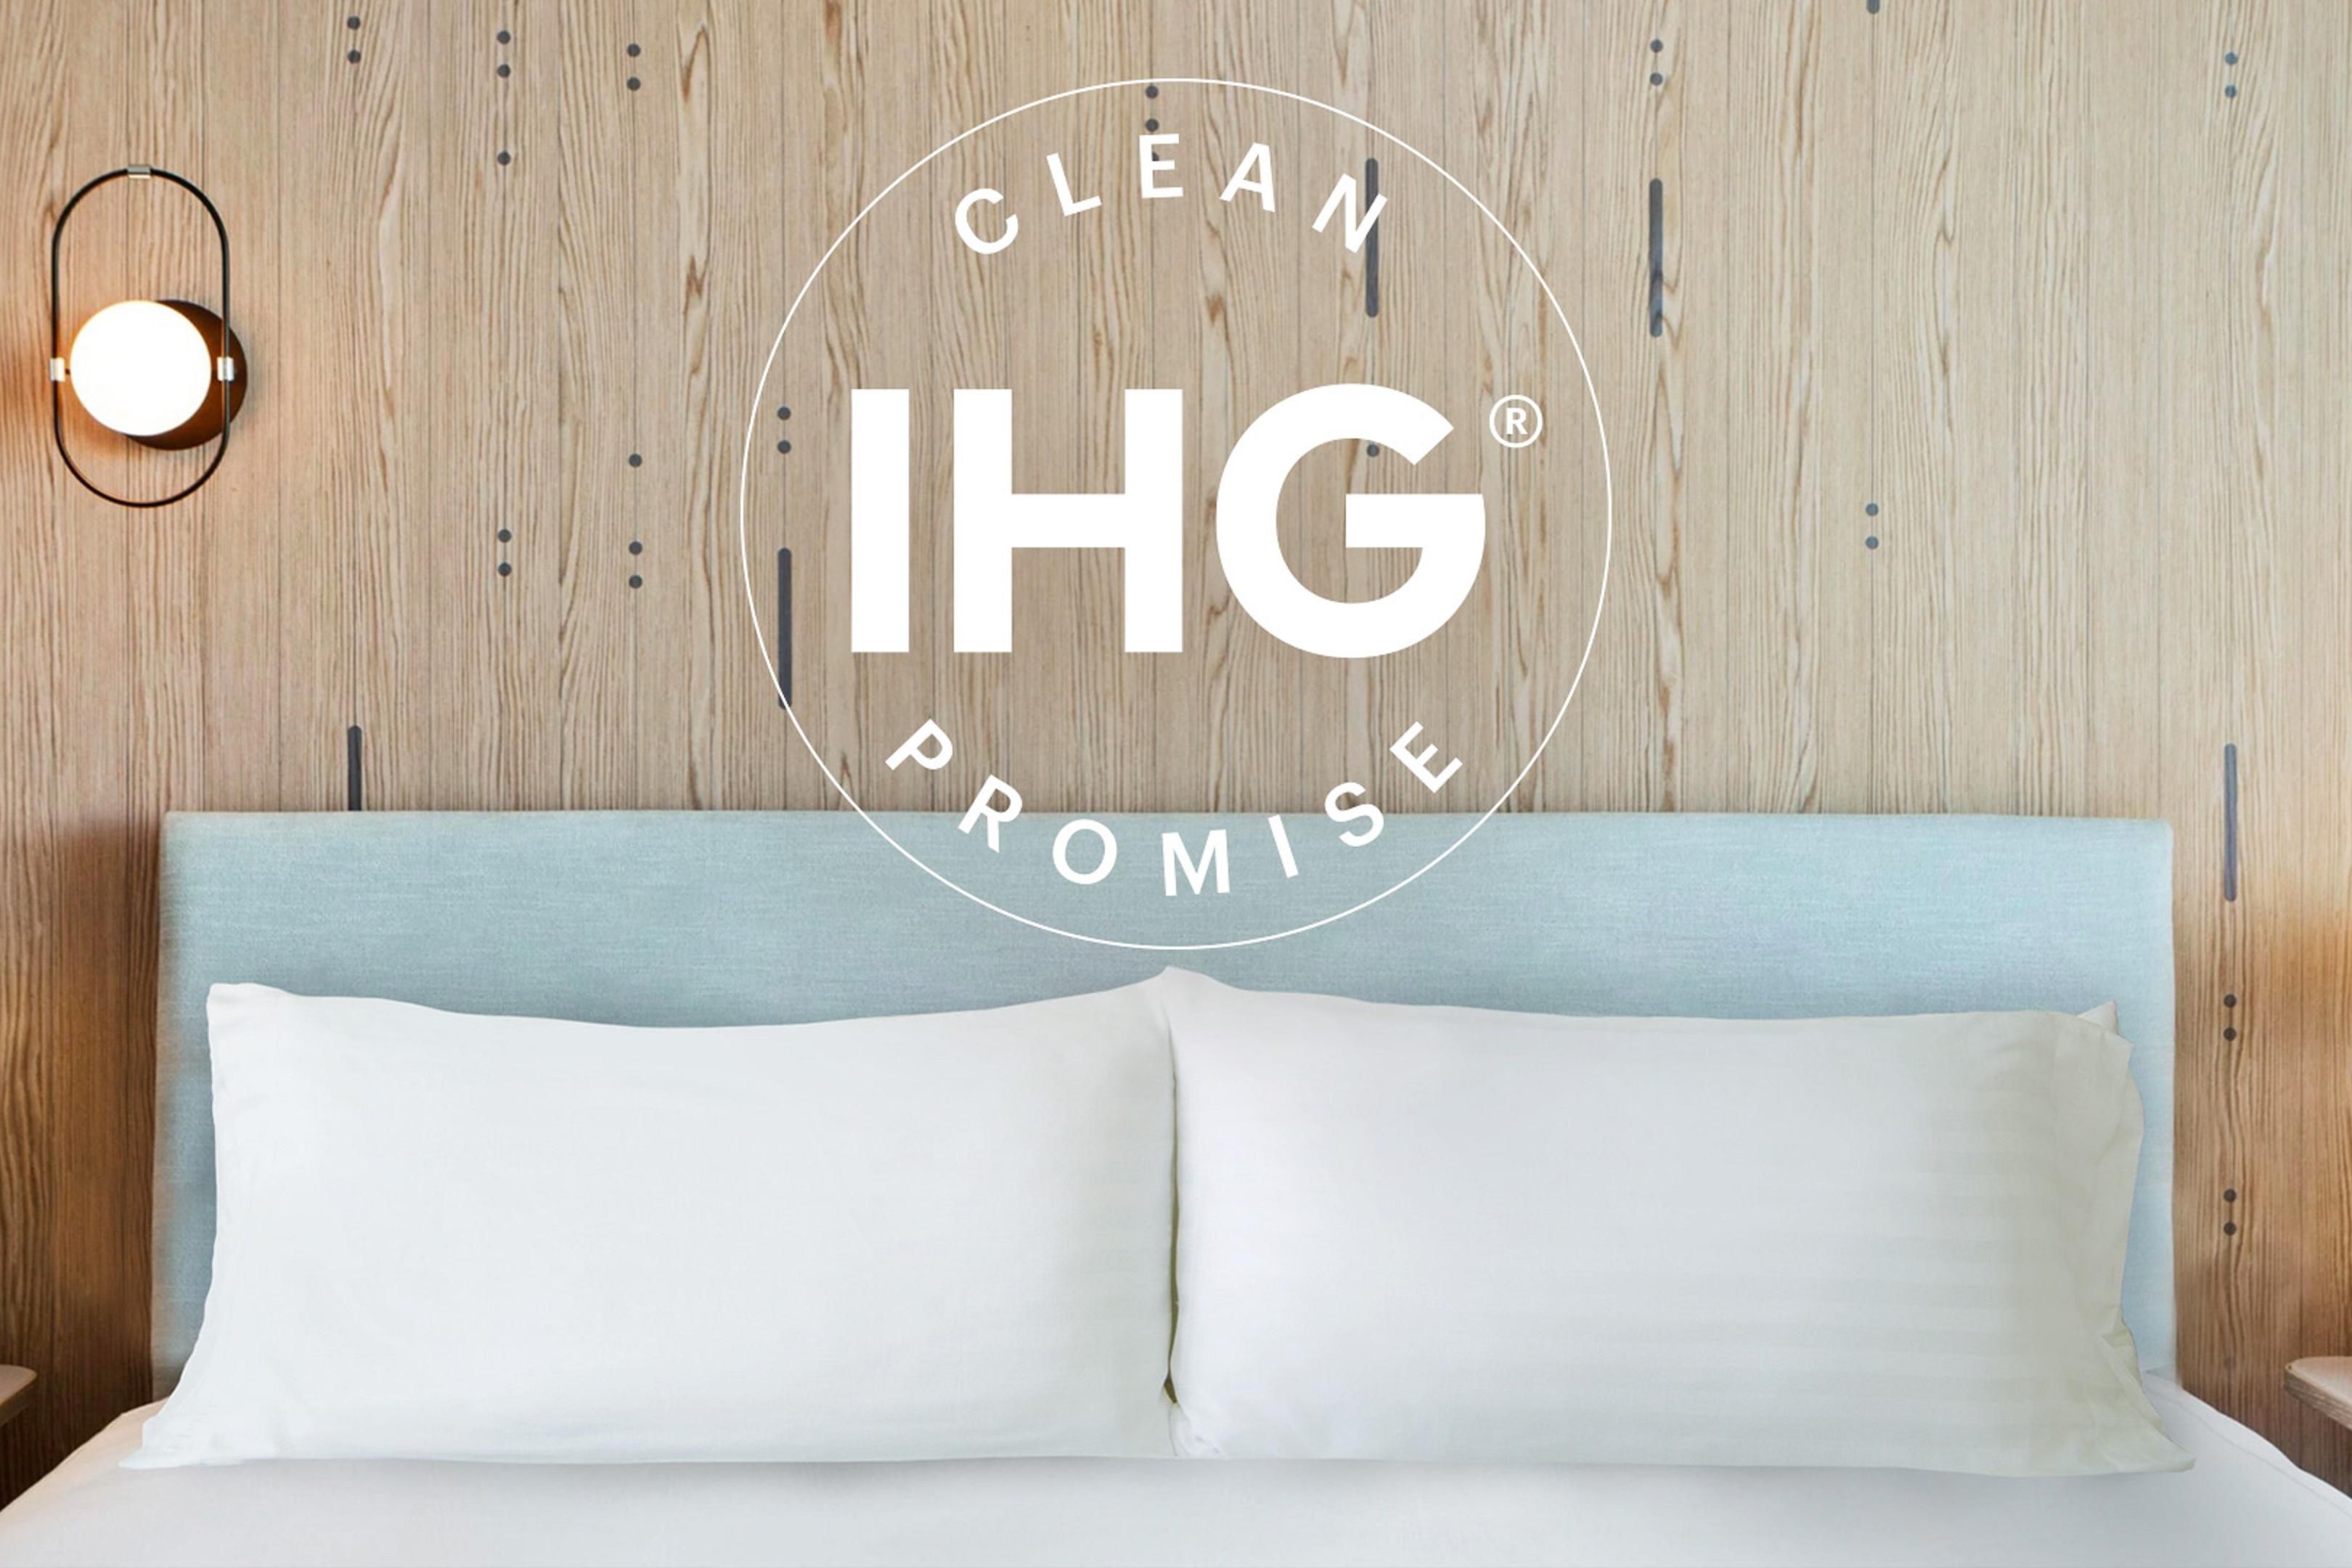 Good isn’t good enough – we are committed to high levels of cleanliness. That means clean, well maintained, clutter free rooms that meet our standards. If this isn’t what you find when you check-in, then we promise to make it right.